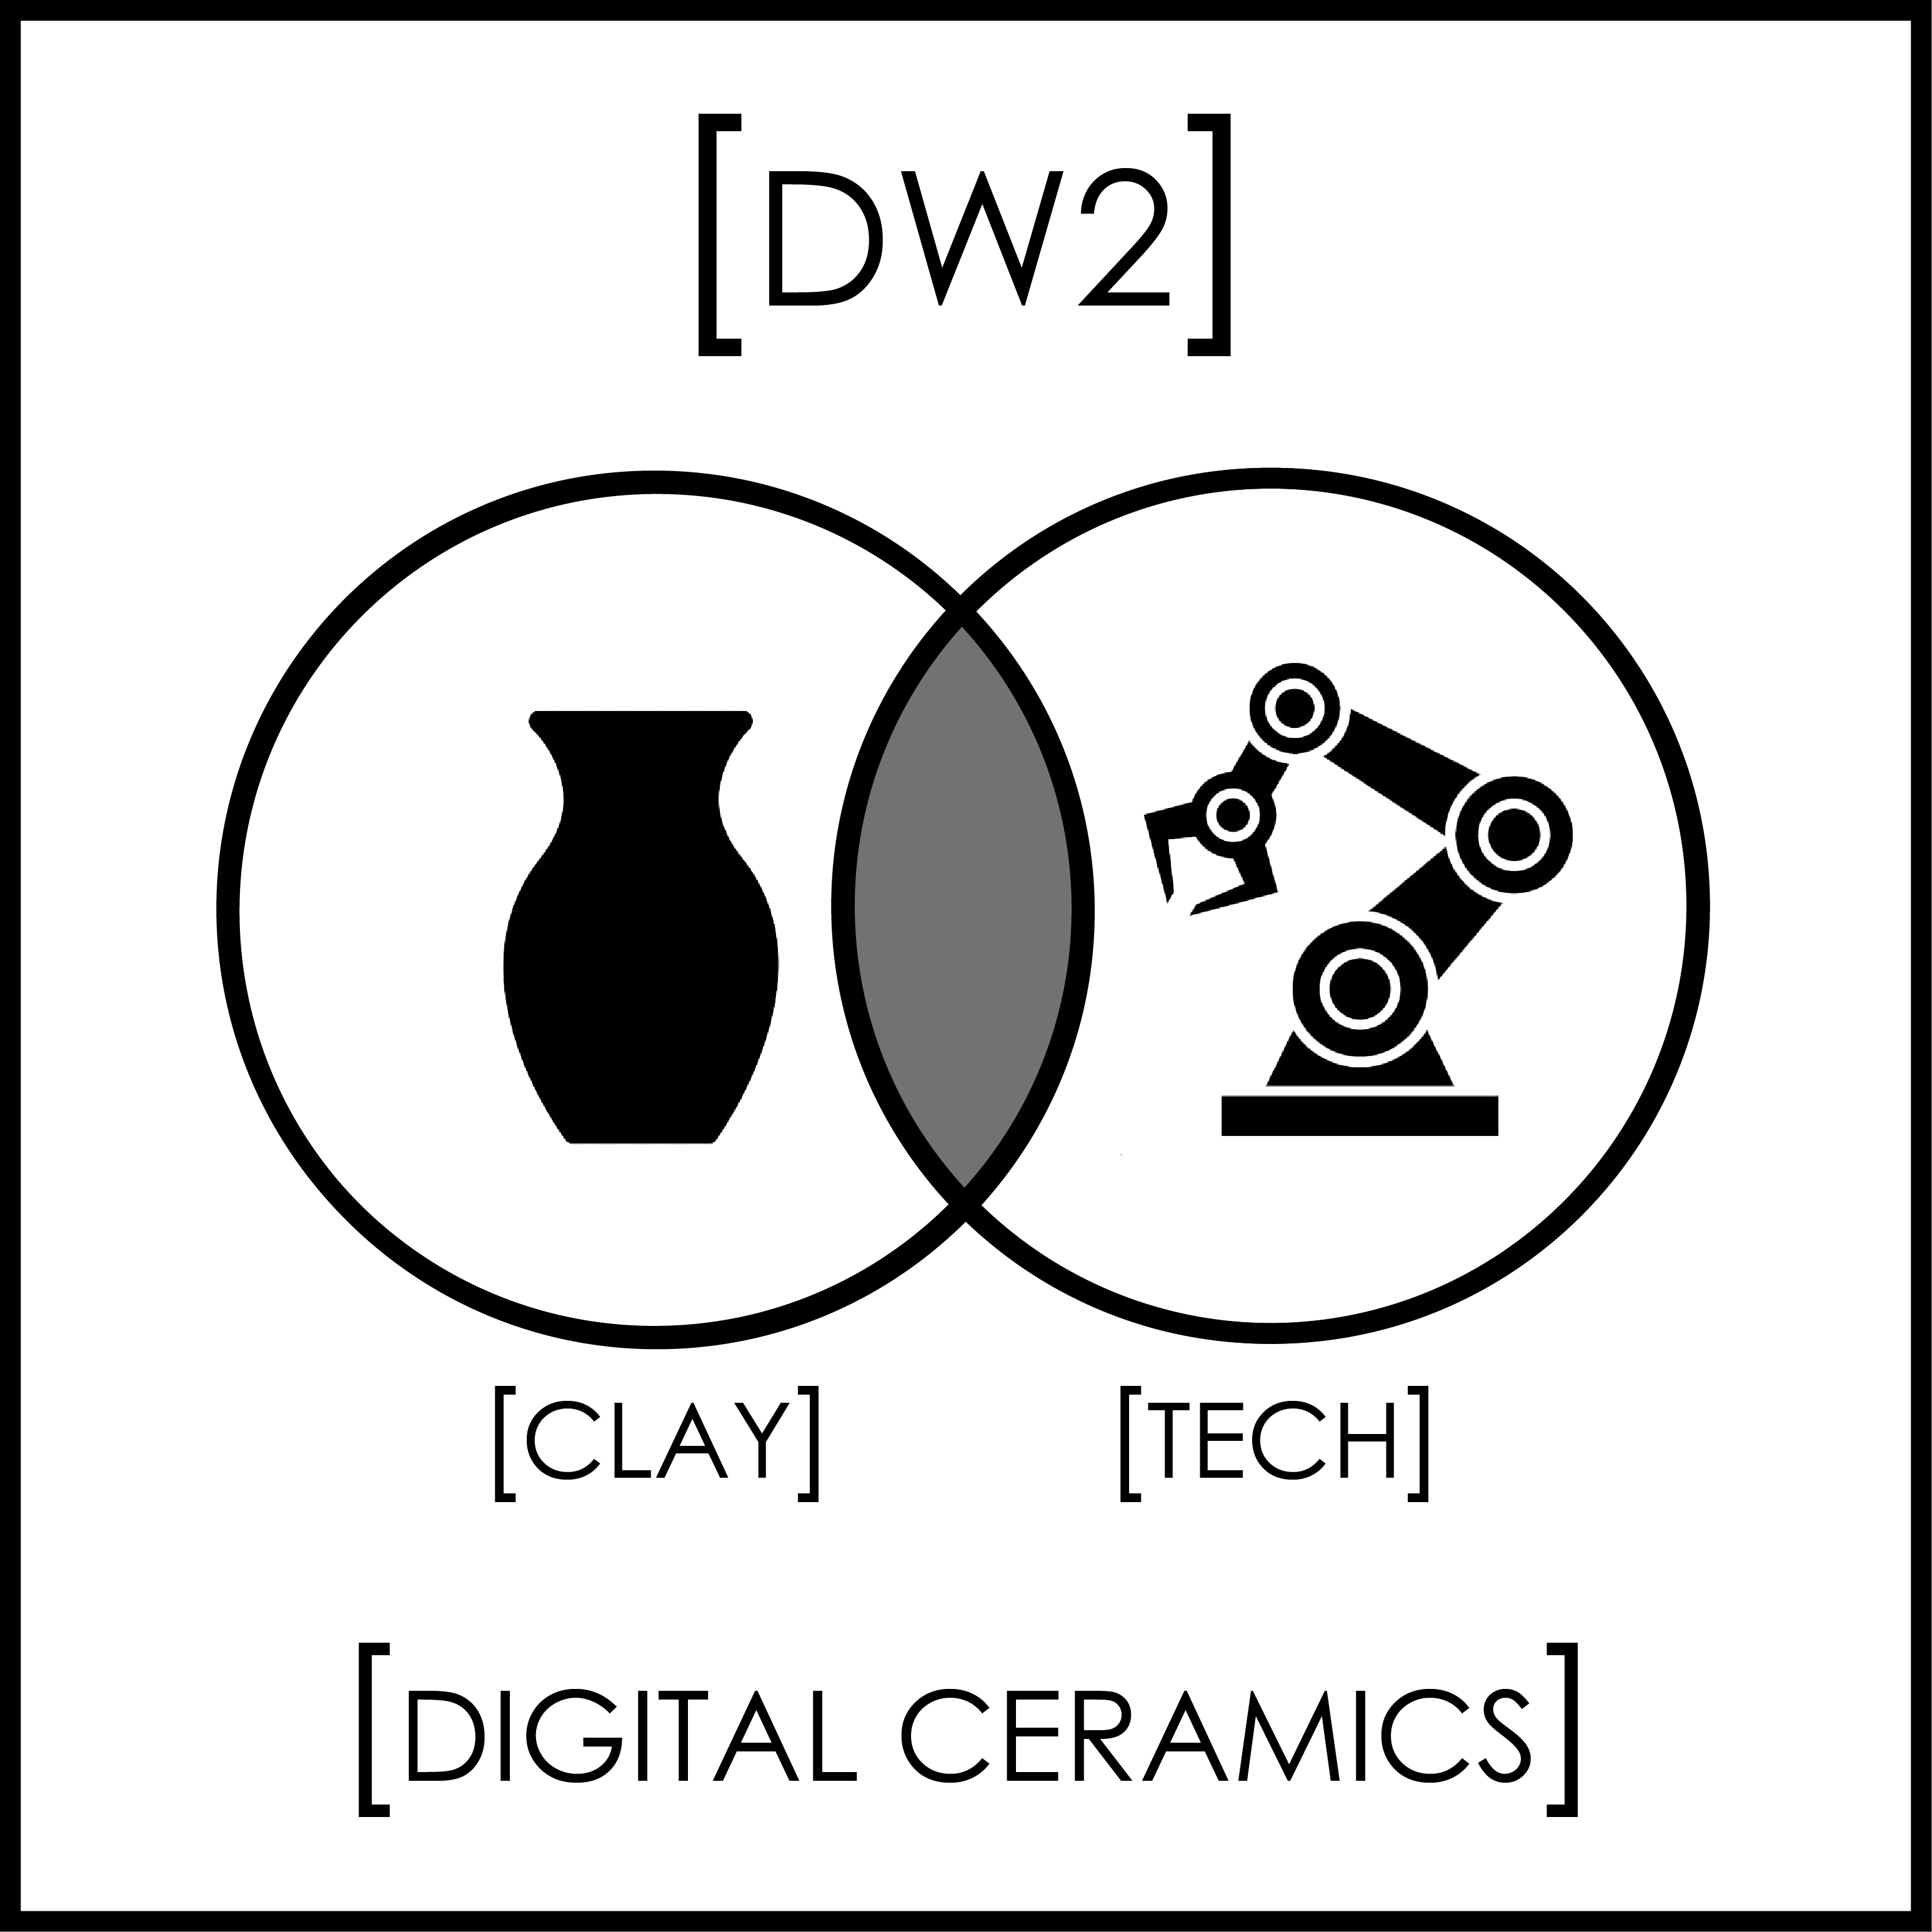 Diagram showing the intersection between Ceramics and Technology